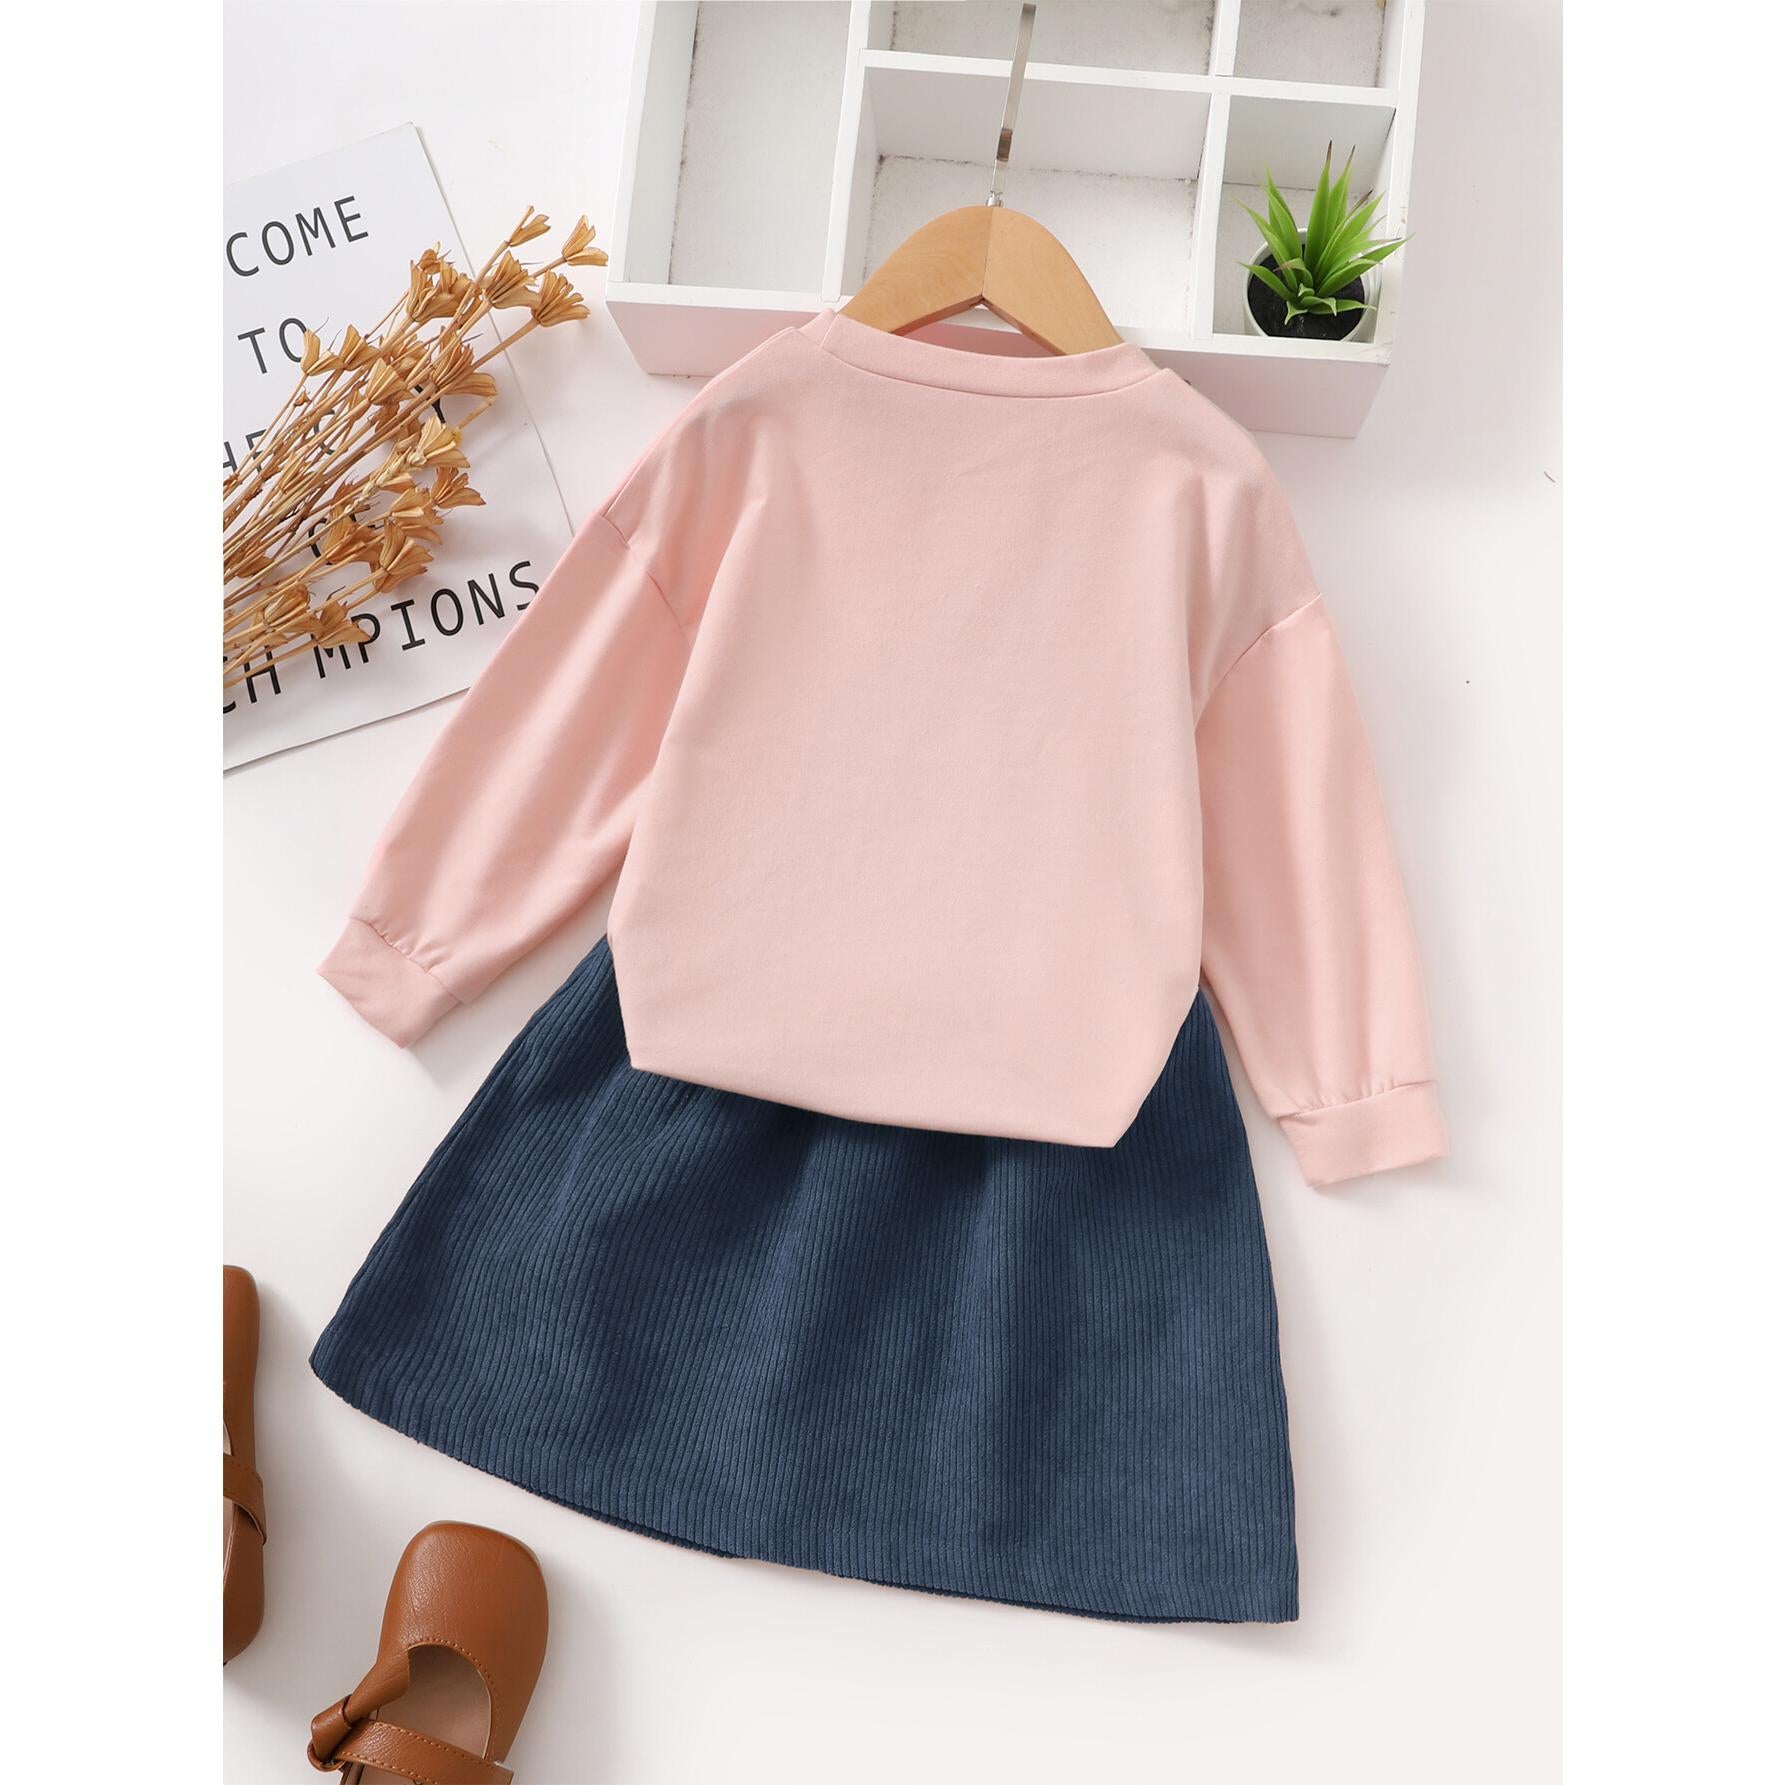 12M-7Y kIDS FASHION Girls Clothes 2PCS Outfits Girls Long Sleeve Round Neckline Tops Skirt Set Pink Catpapa 12106324-2